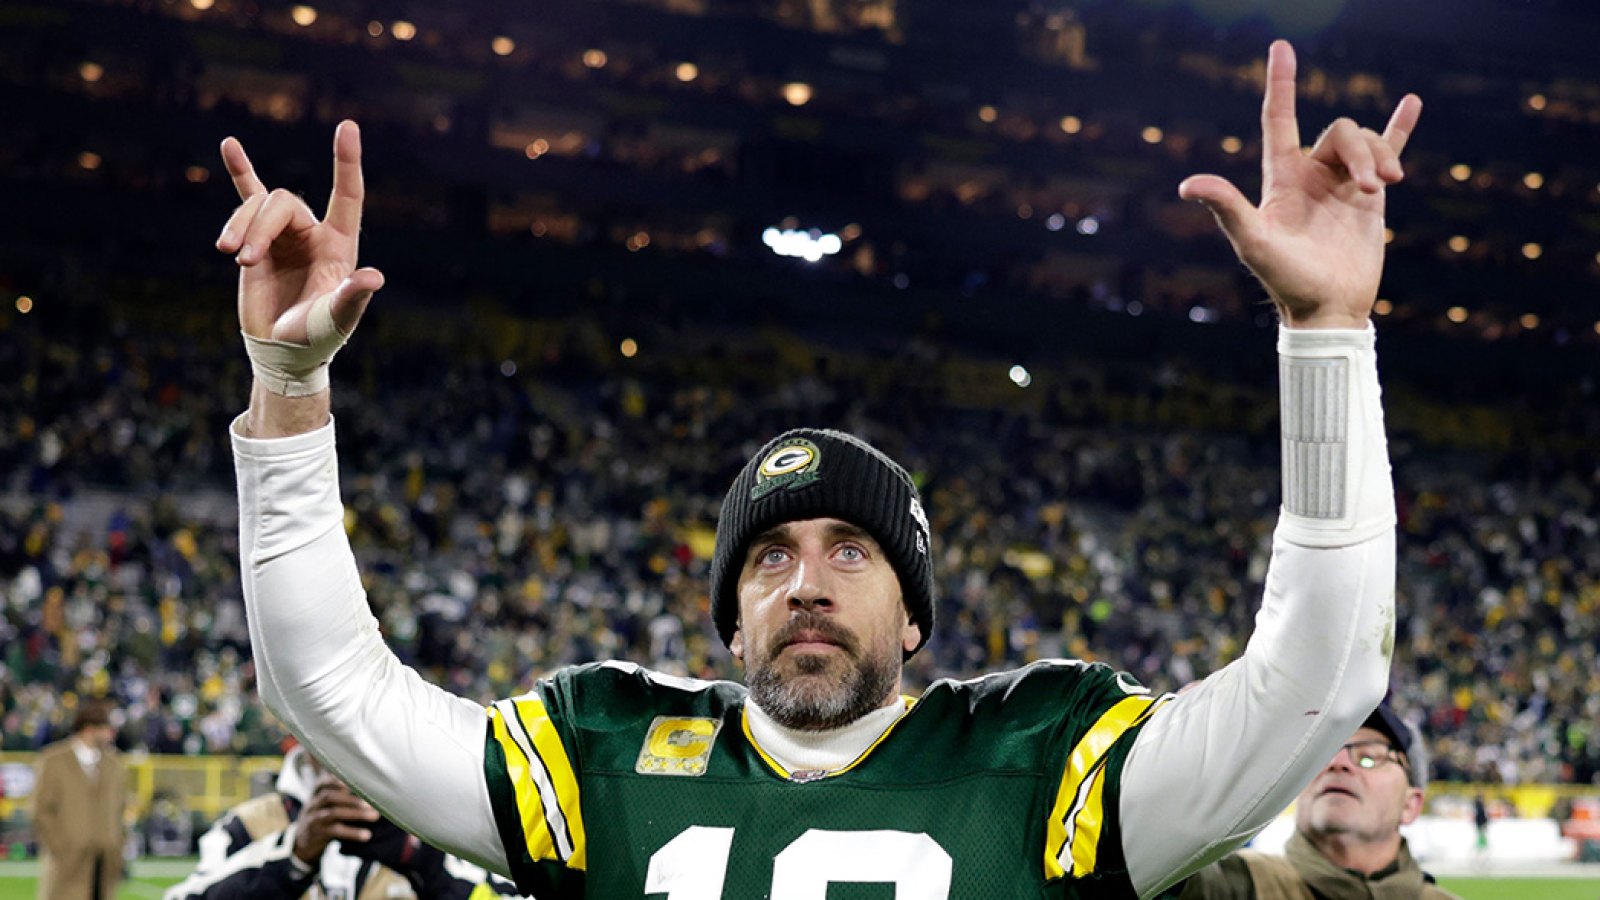 aaron rodgers traded